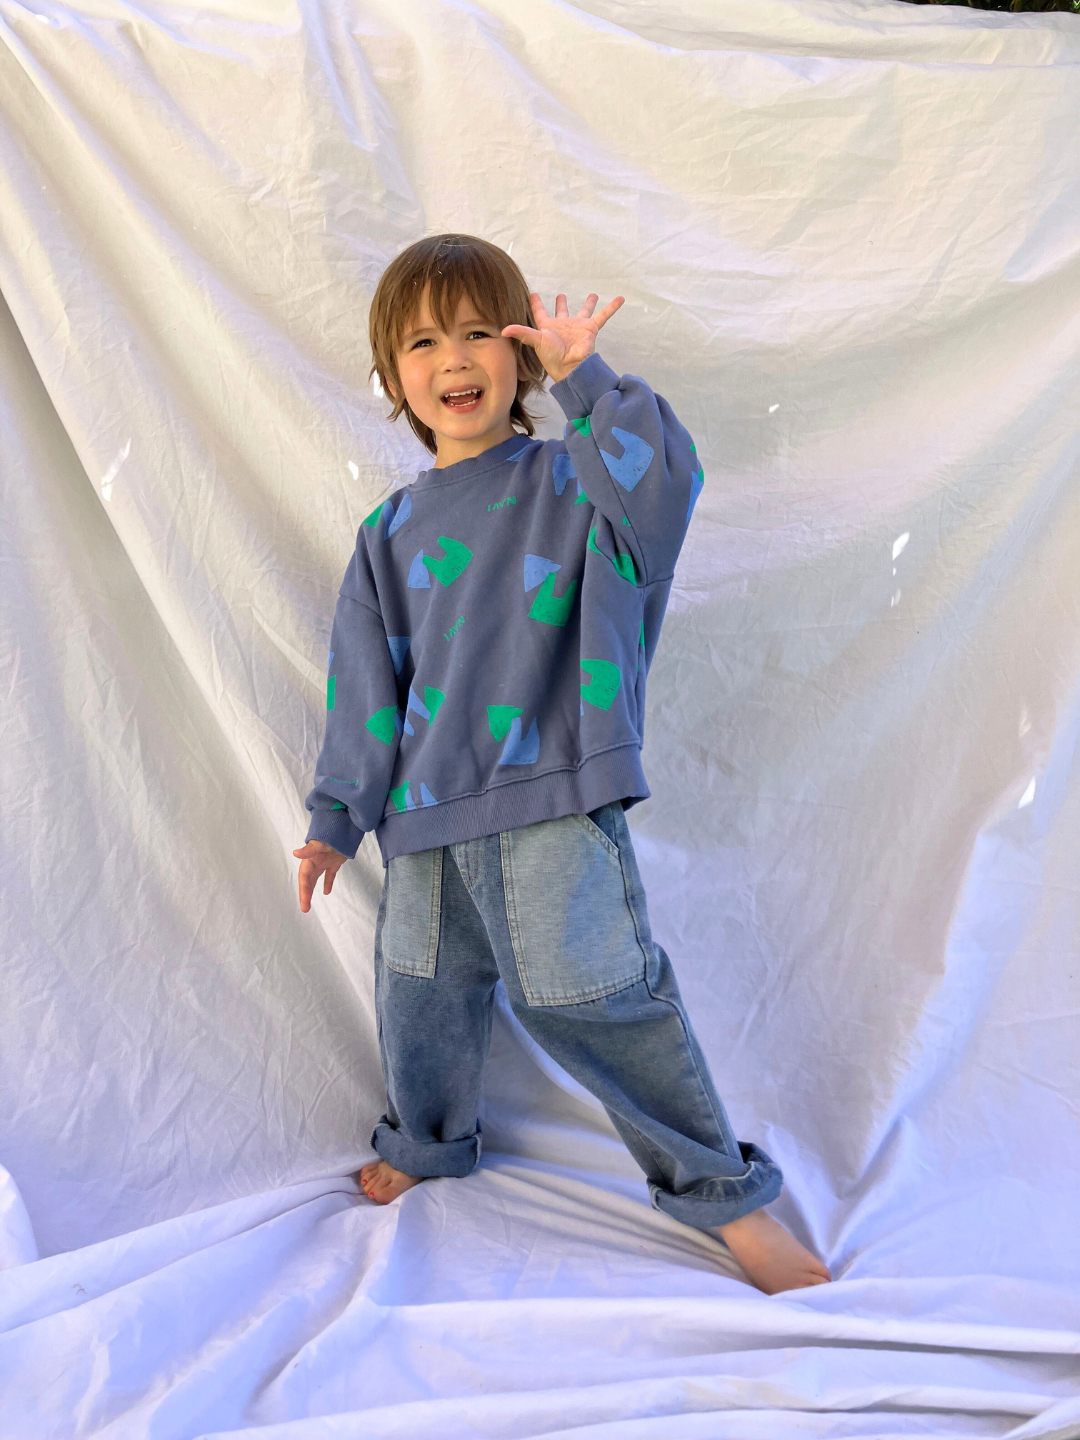 Vintage Blue | Child wearing the kids Duo Sweatshirt in faded blue printed with green and blue shapes and the word Navi. He is smiling and waving one hand, and wearing baggy blue jeans, and standing on a white sheet backdrop.